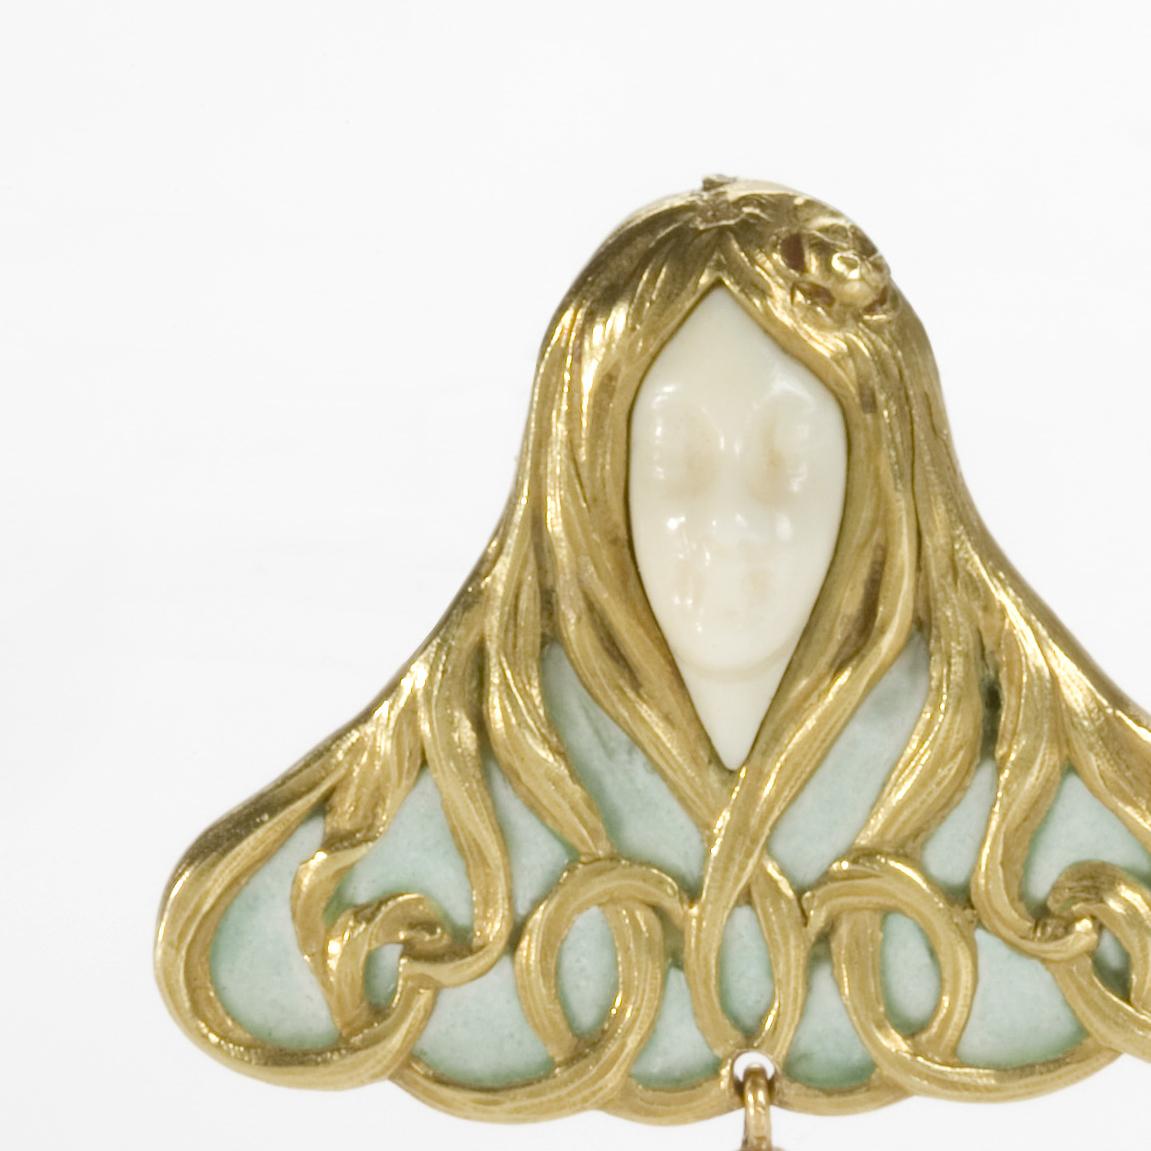 This Art Nouveau brooch, composed of gold, carved white coral, freshwater pearl, and plique-à-jour enamel, dates from 1900, and is the work of the Parisian jeweler, René Foy. The figural form depicts a woman, whose face is carved in white coral,